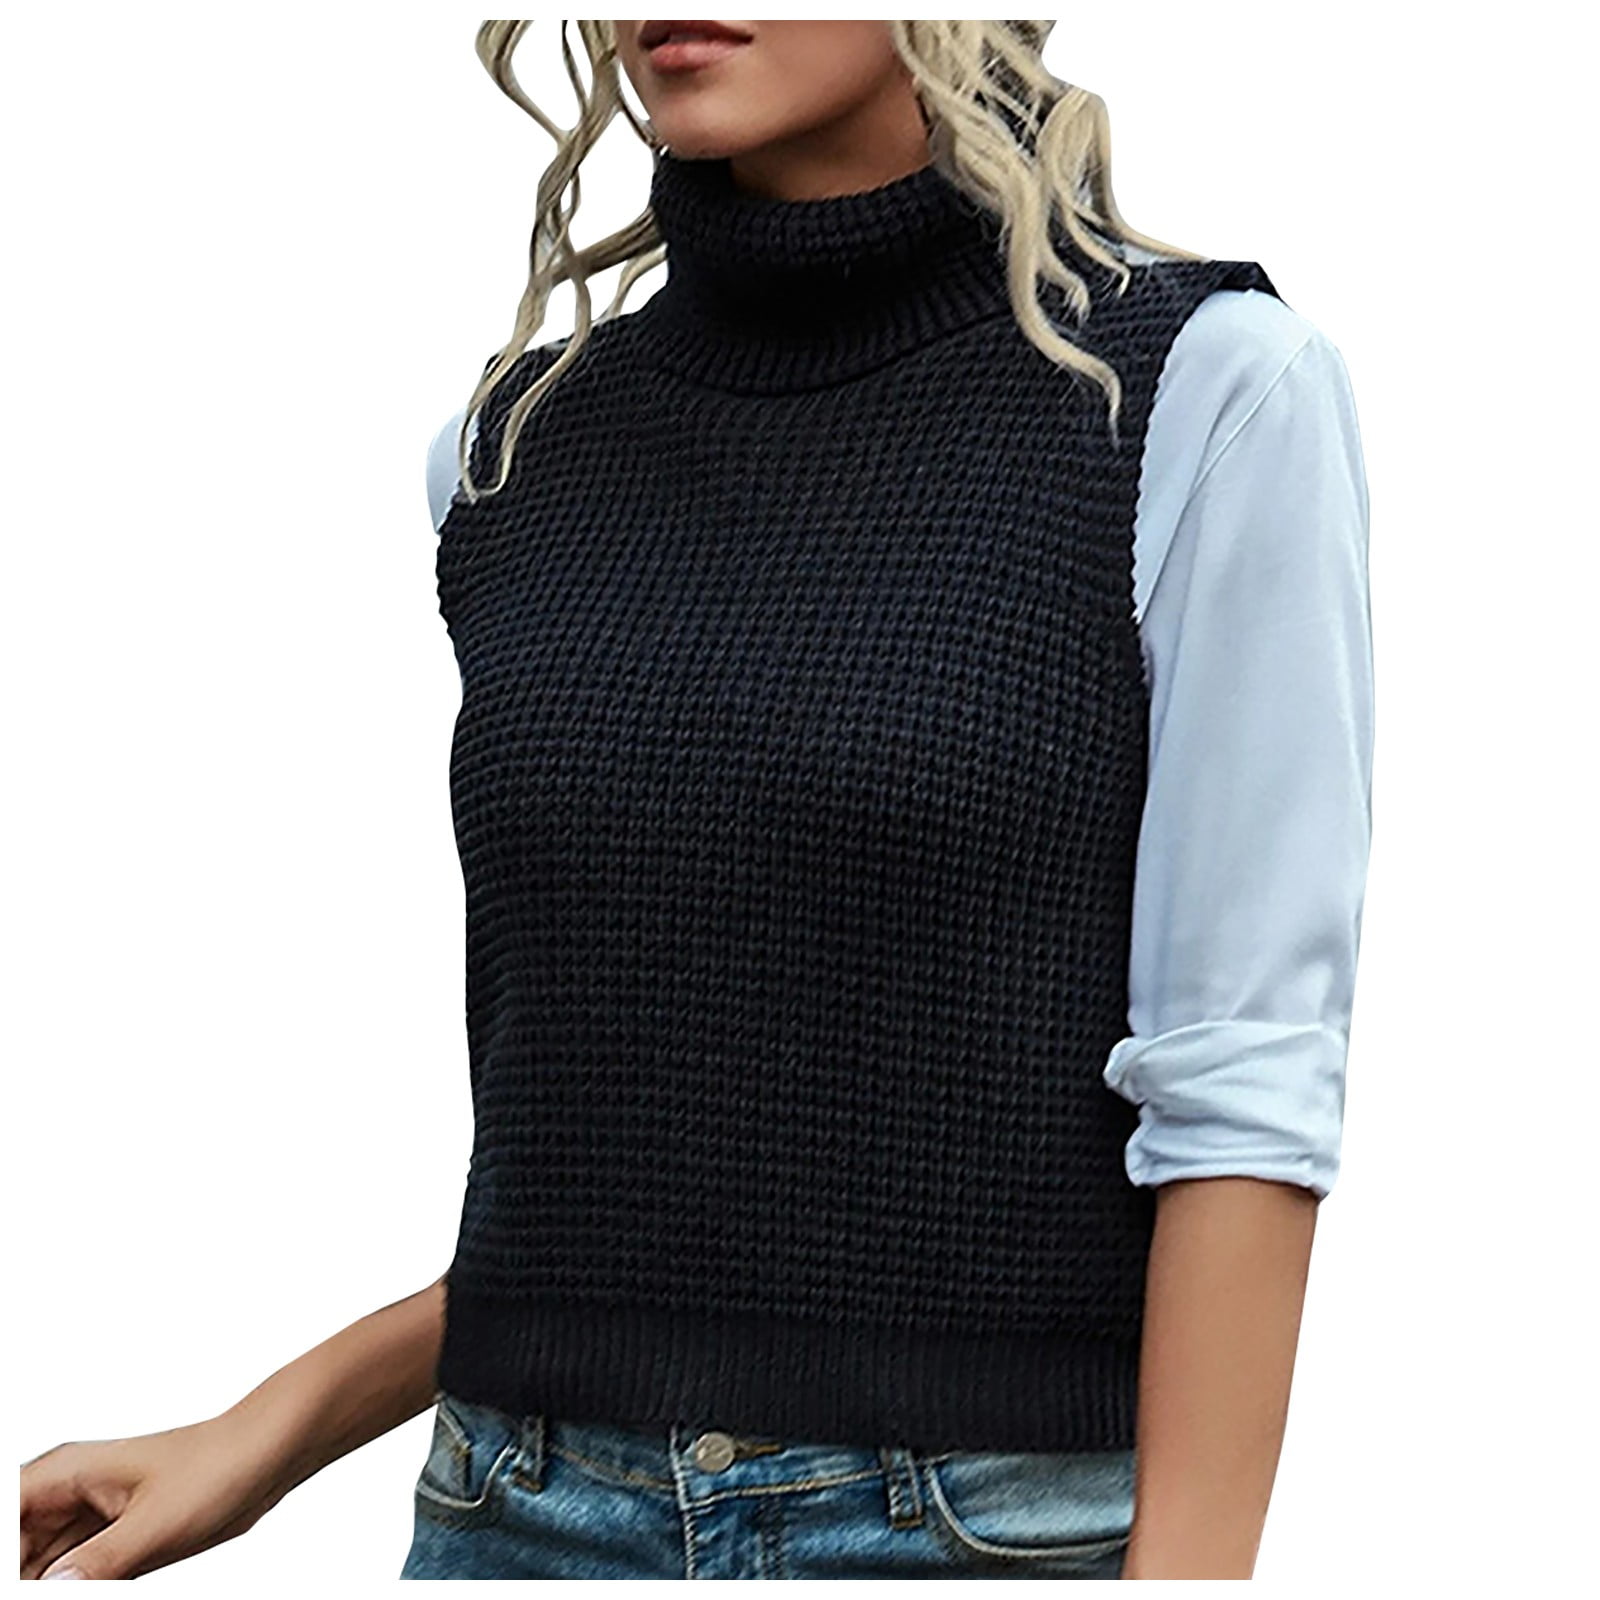 Kaos Synthetic Sweater in Black Womens Clothing Jumpers and knitwear Sleeveless jumpers 